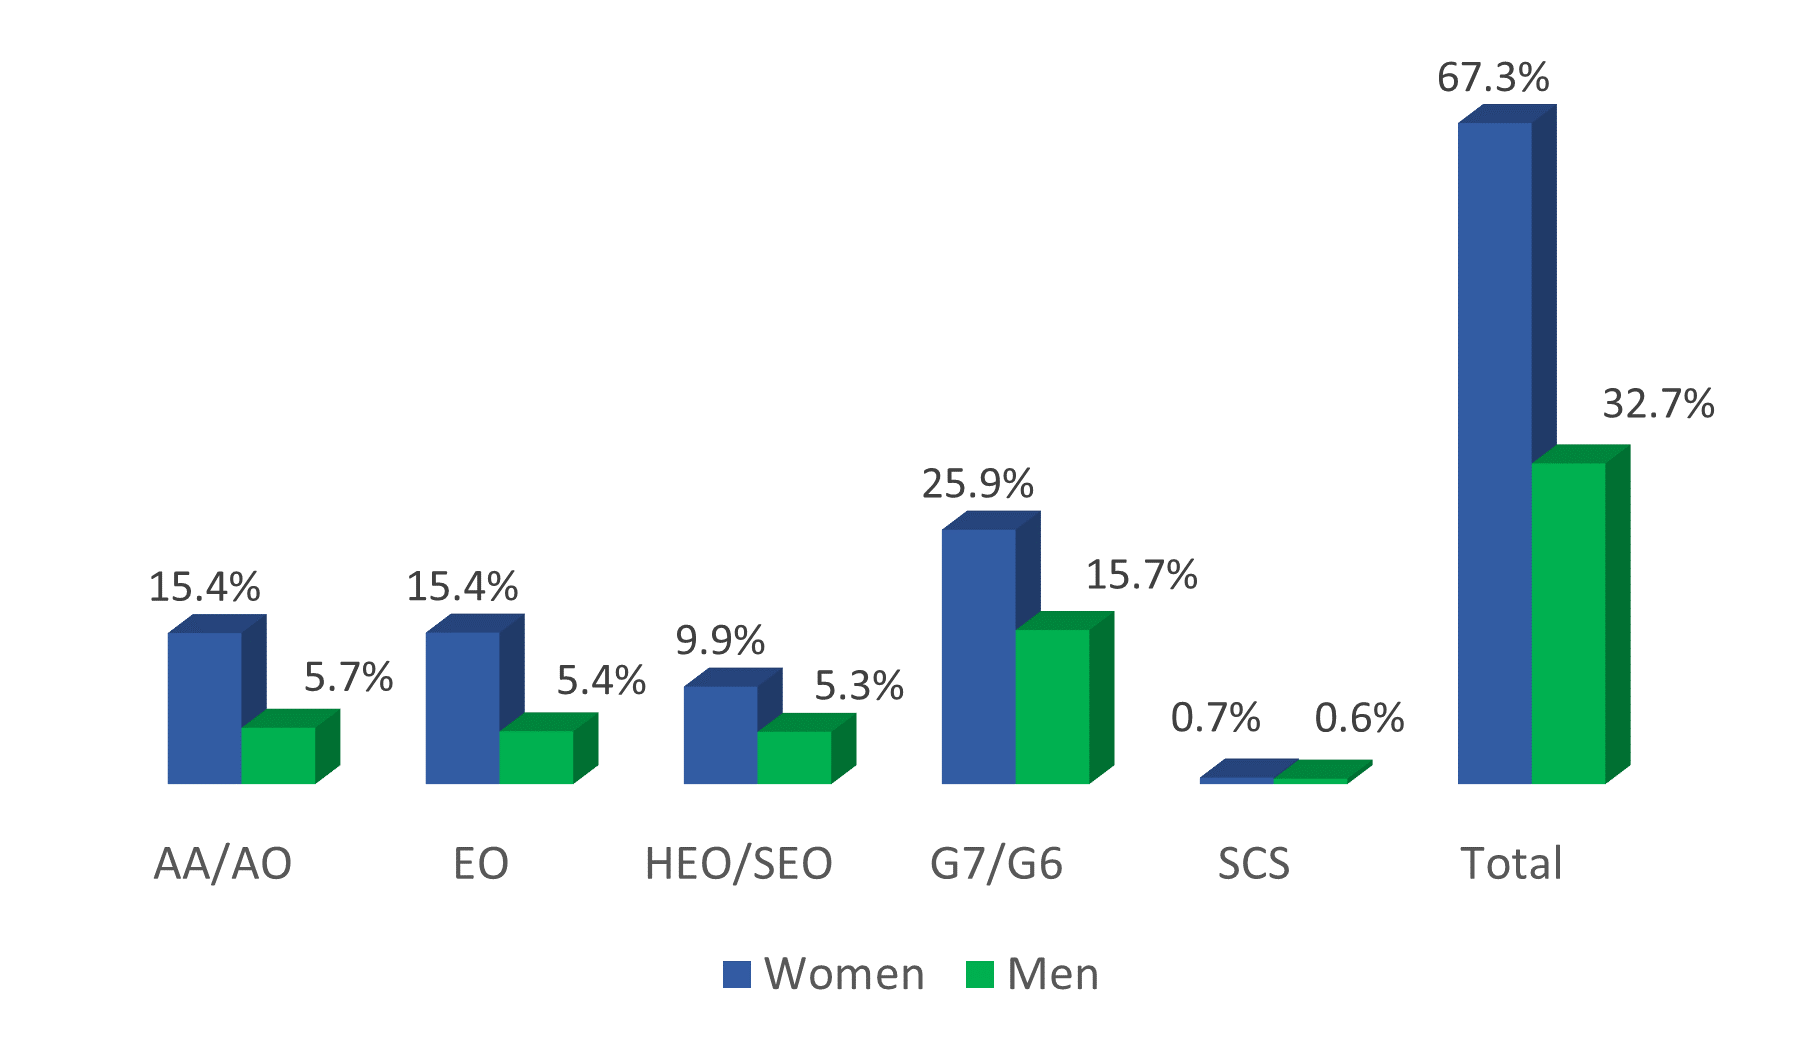 Graph showing the distribution of female and male employees across the grades as detailed in the table above.